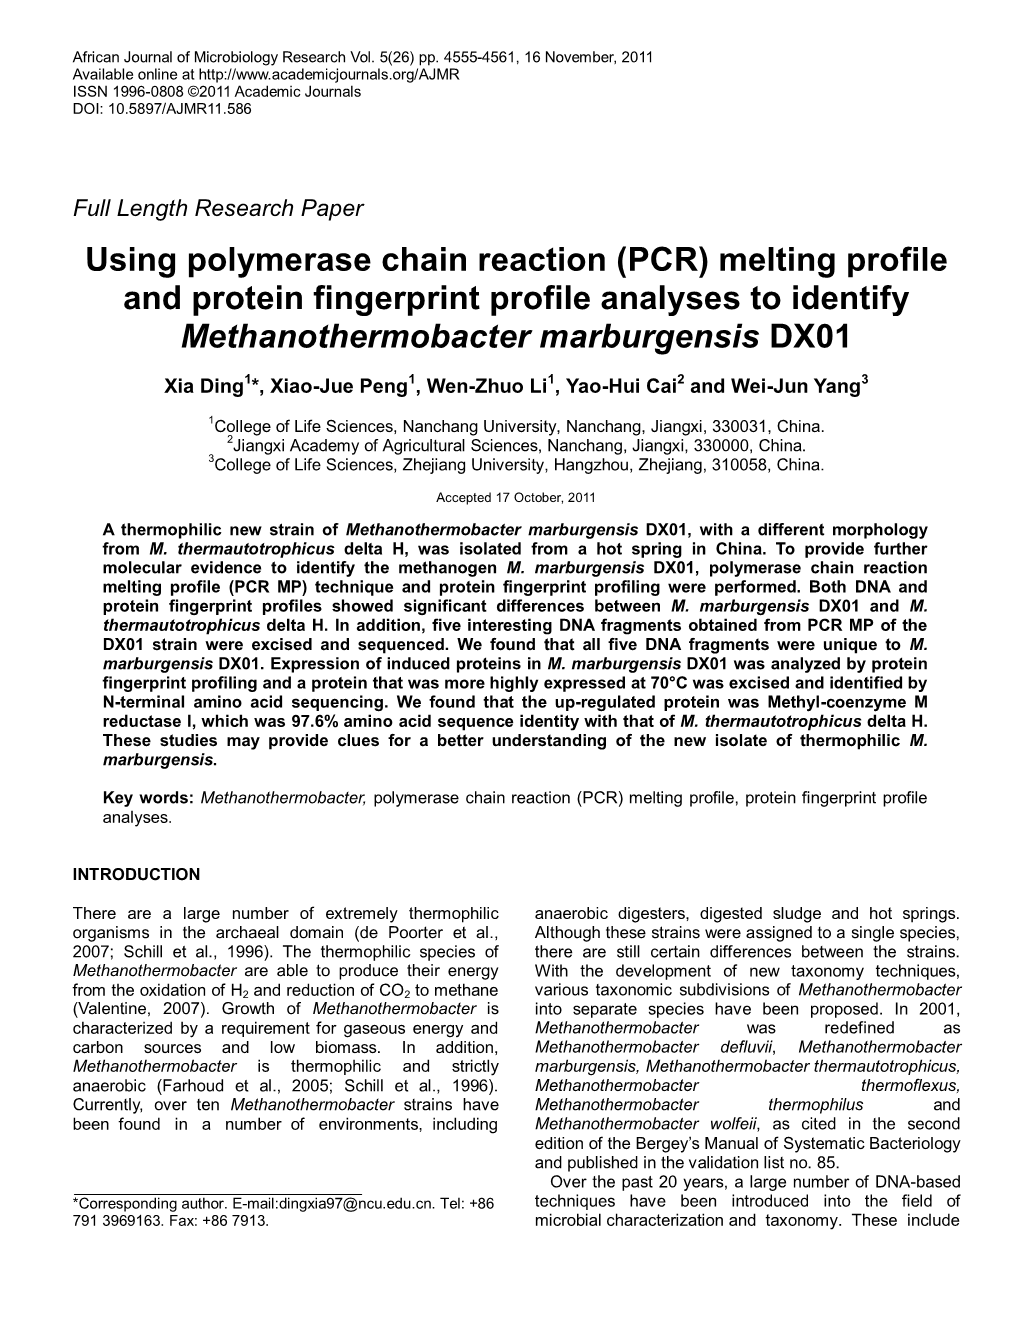 Using Polymerase Chain Reaction (PCR) Melting Profile and Protein Fingerprint Profile Analyses to Identify Methanothermobacter Marburgensis DX01